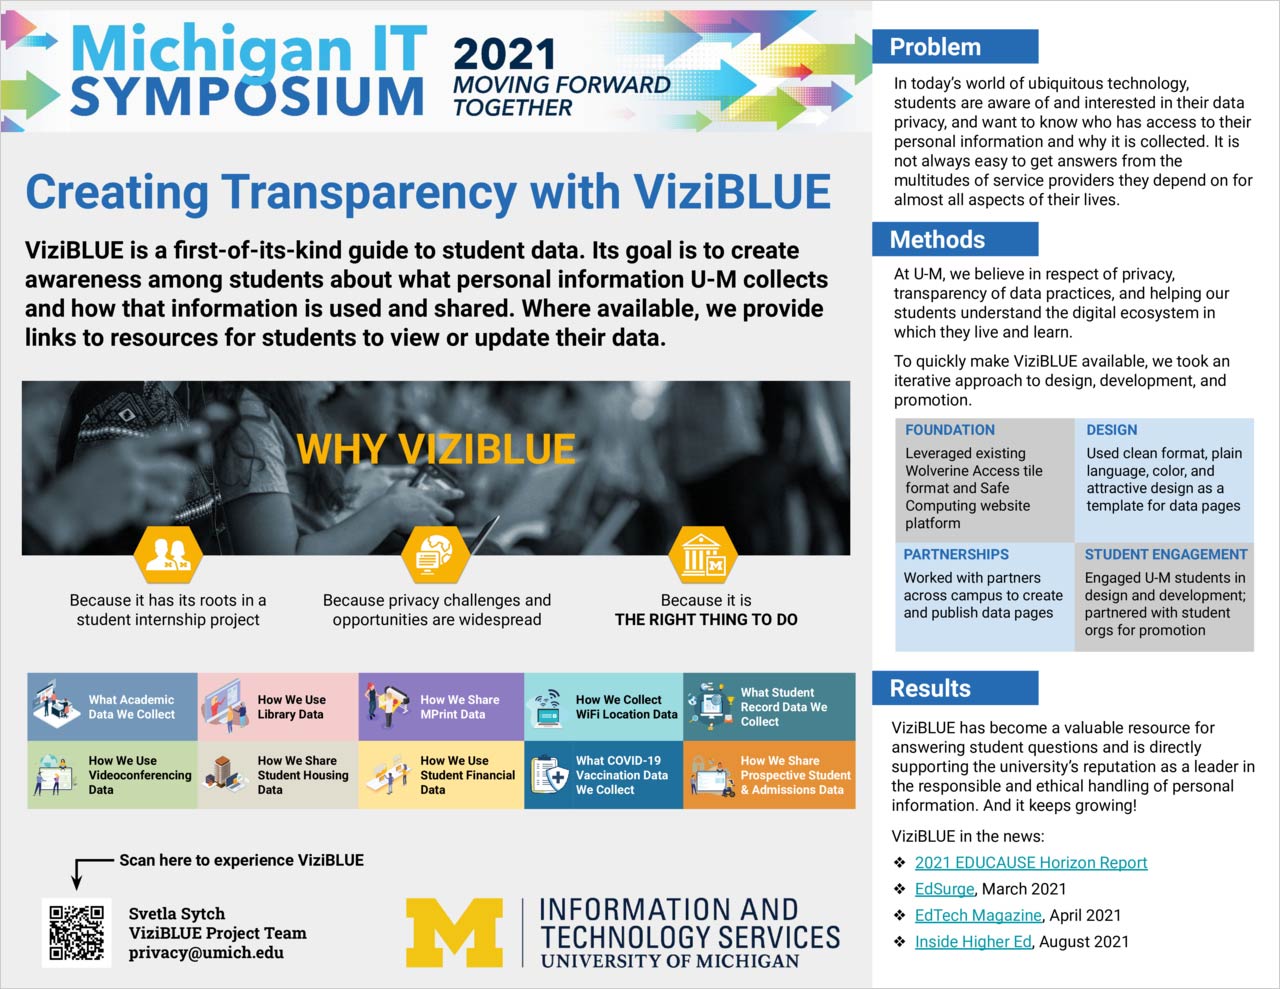 Creating Transparency with ViziBLUE